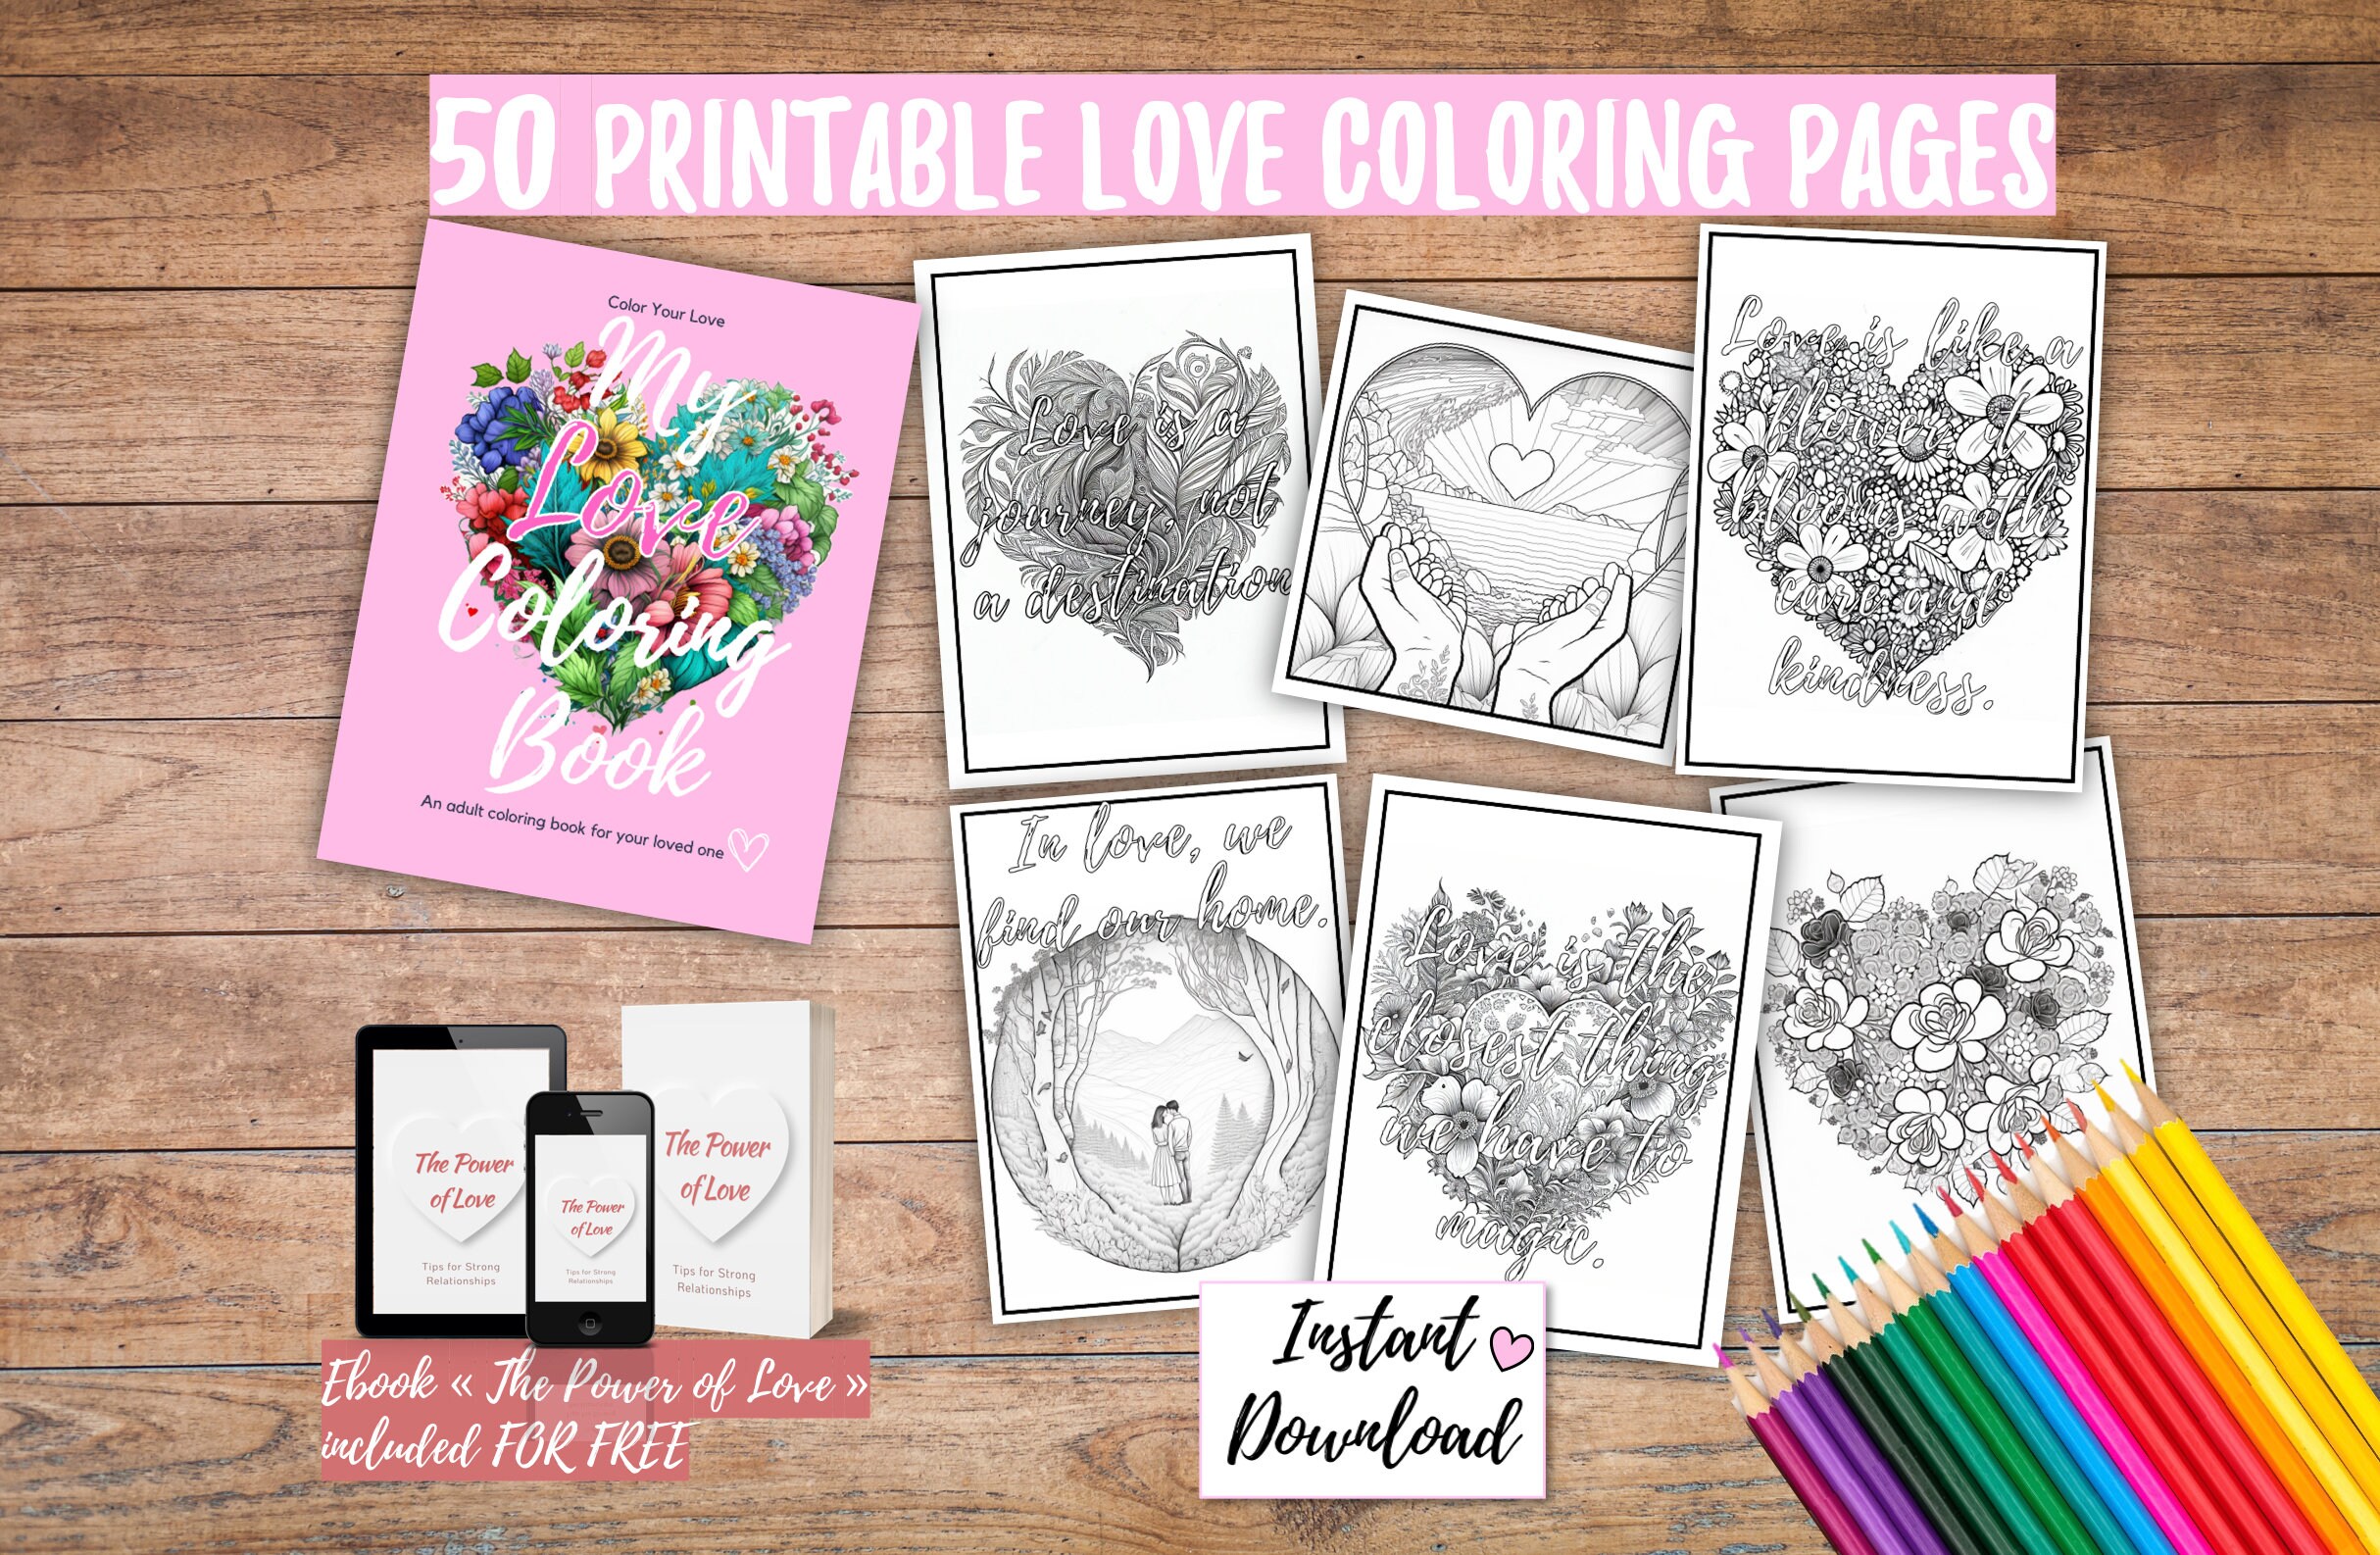 Instant download love coloring pages for adults and